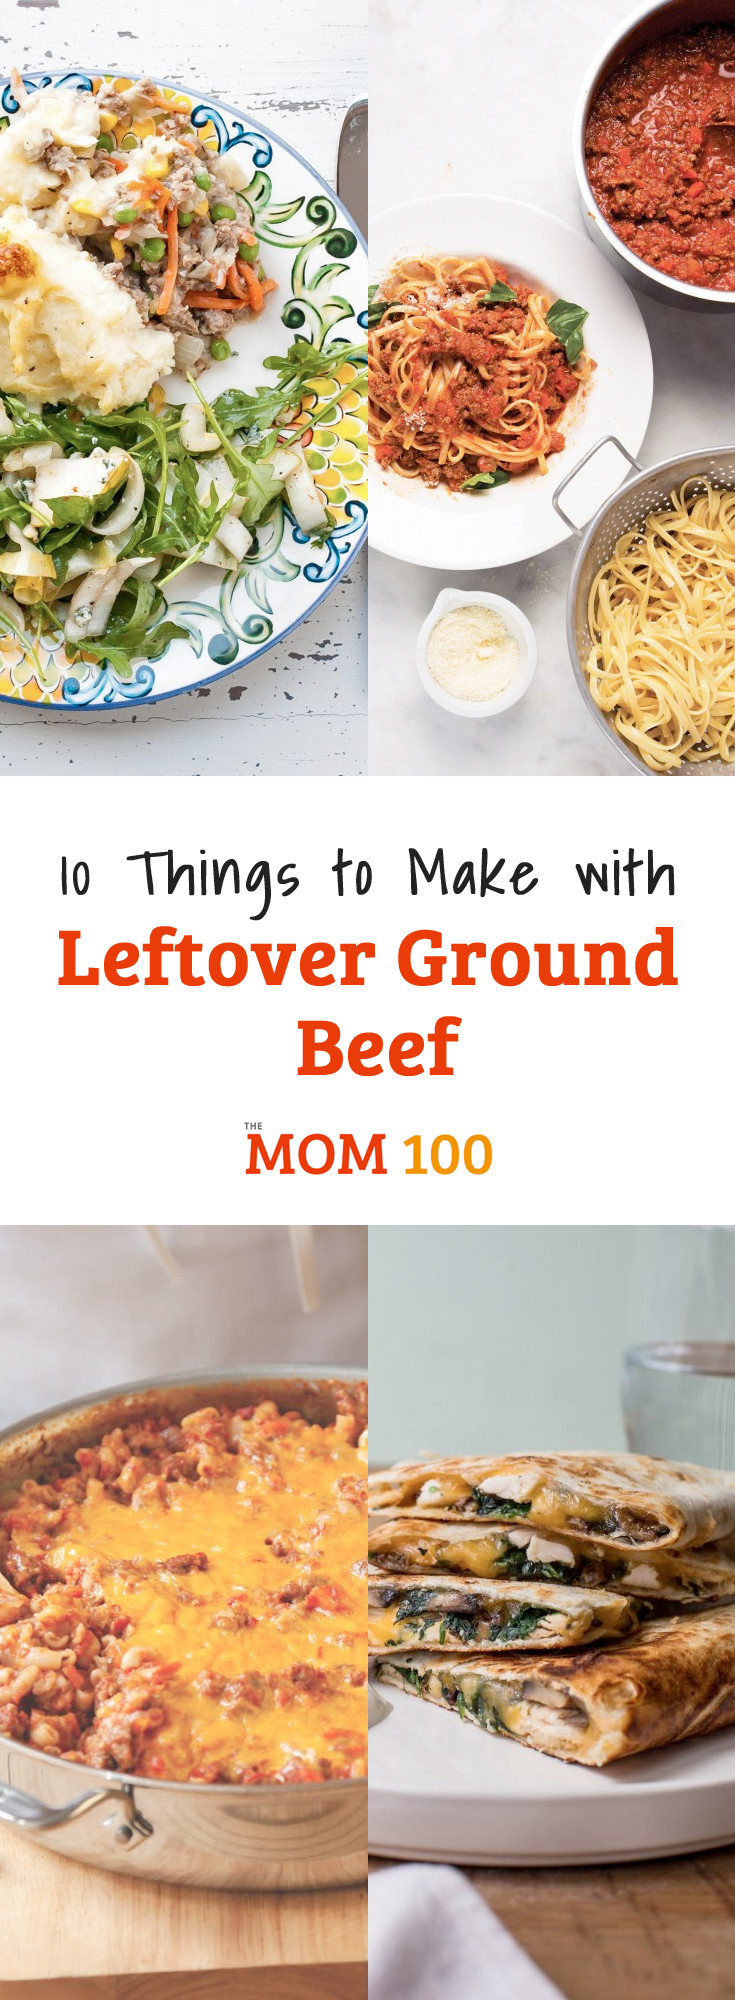 Stuff To Make With Ground Beef
 10 Things To Make With Leftover Ground Beef